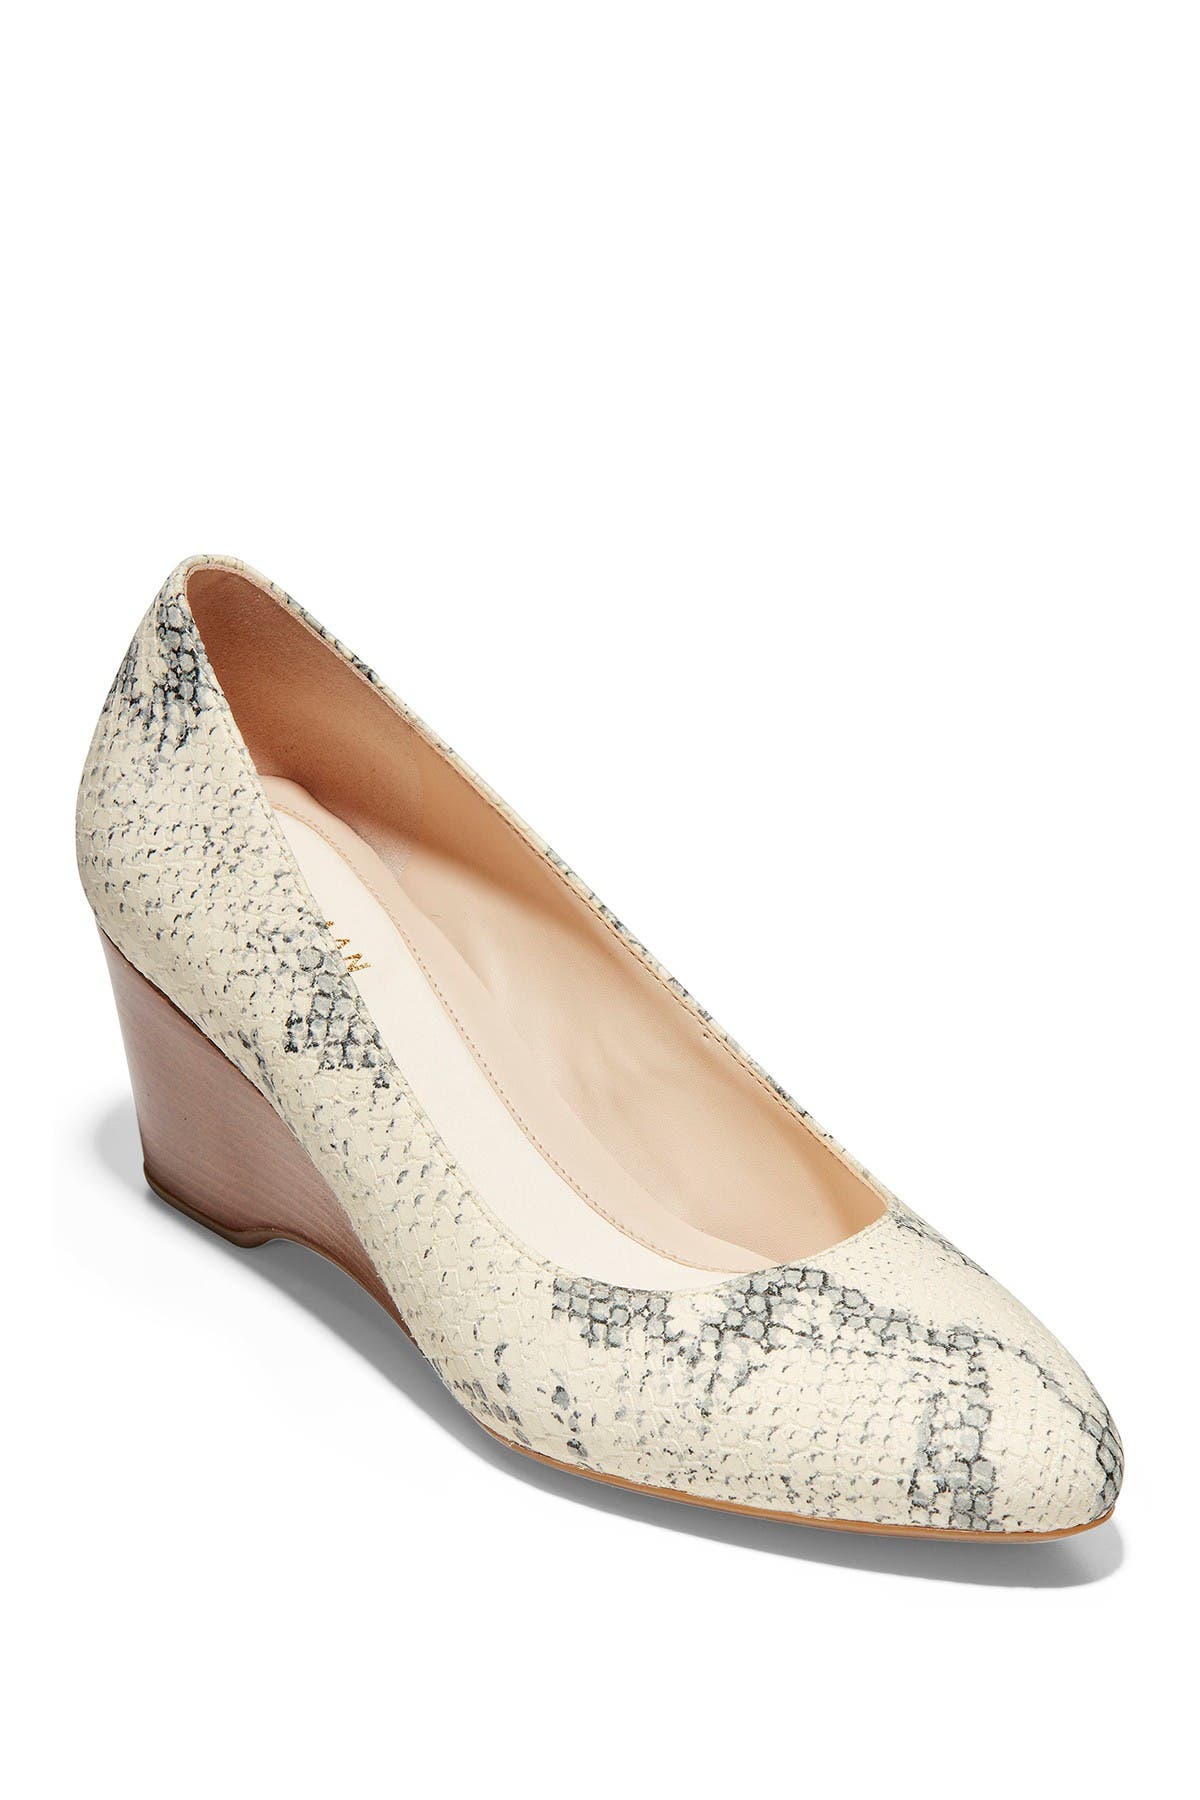 Cole Haan | The Go-To Snake Print Wedge 